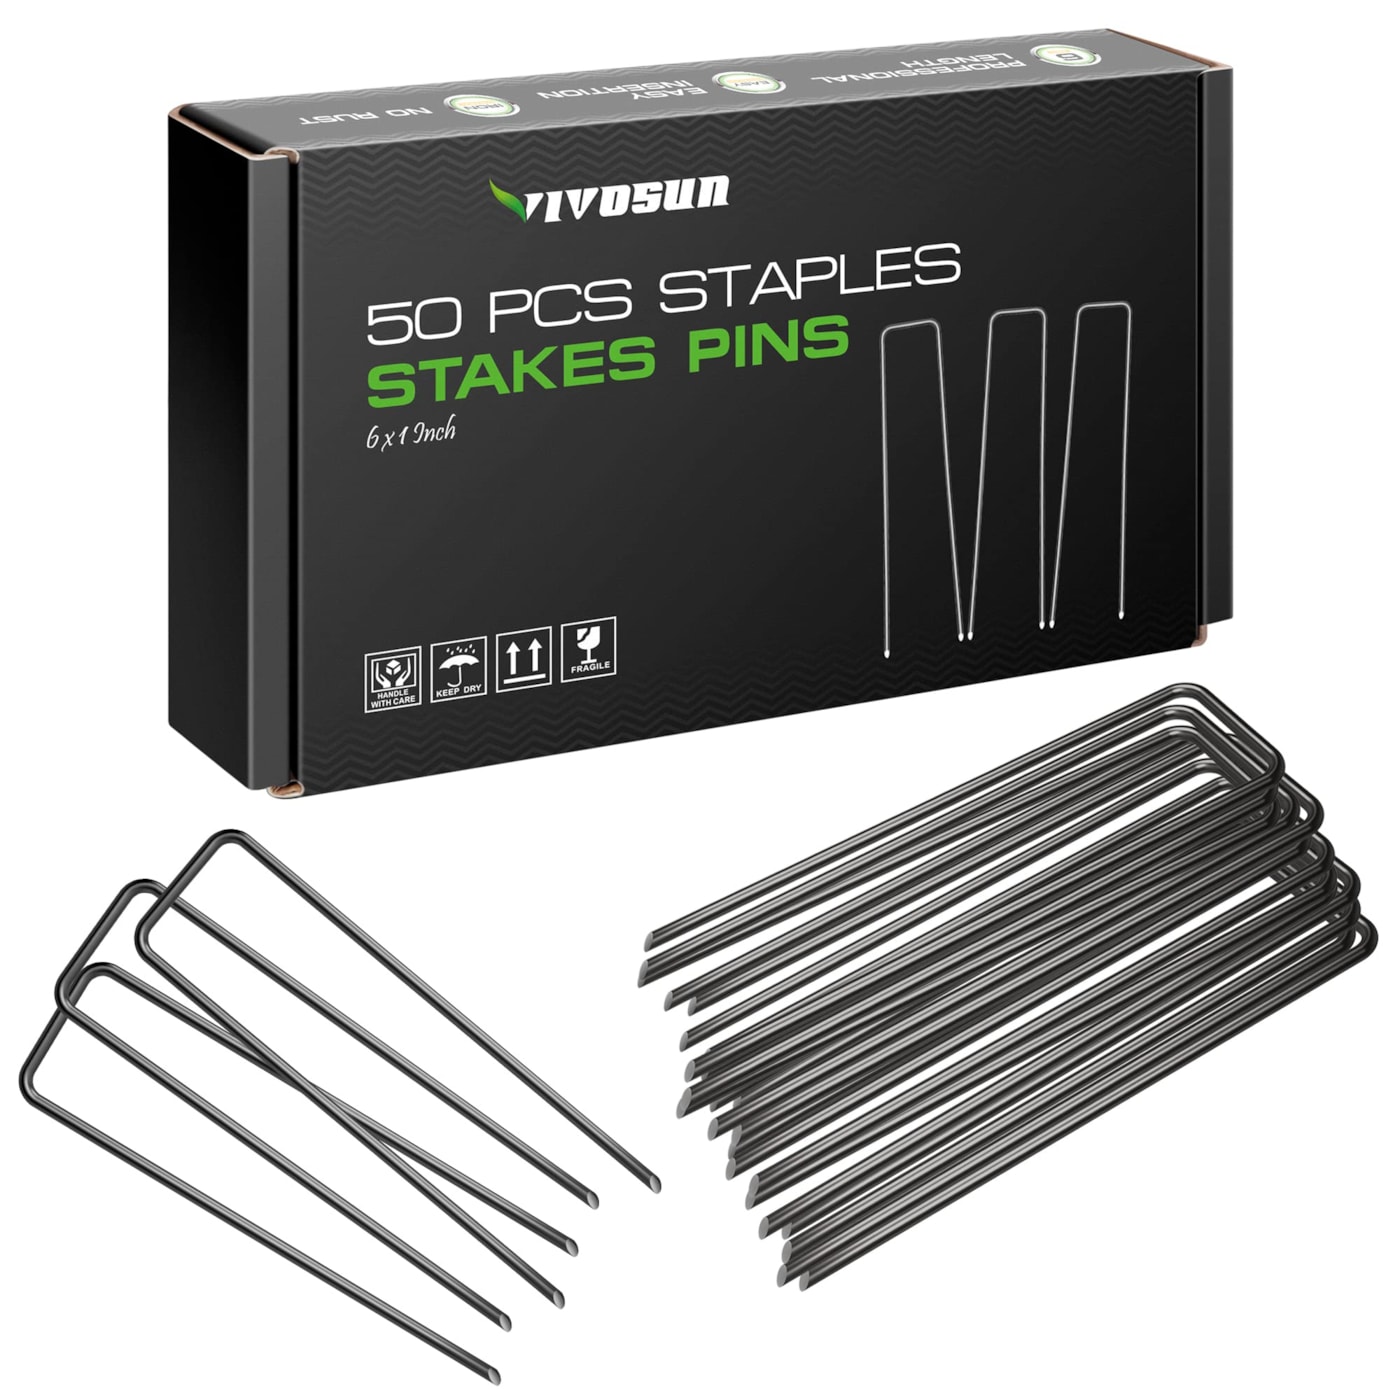 VIVOSUN 50 PCS 6 Inch Garden Stakes Landscape Staples U-Shaped Pins for Barrier Fabric, Ground Cover, Soaker Hose, Irrigation Tubing, Invisible Dog Fence